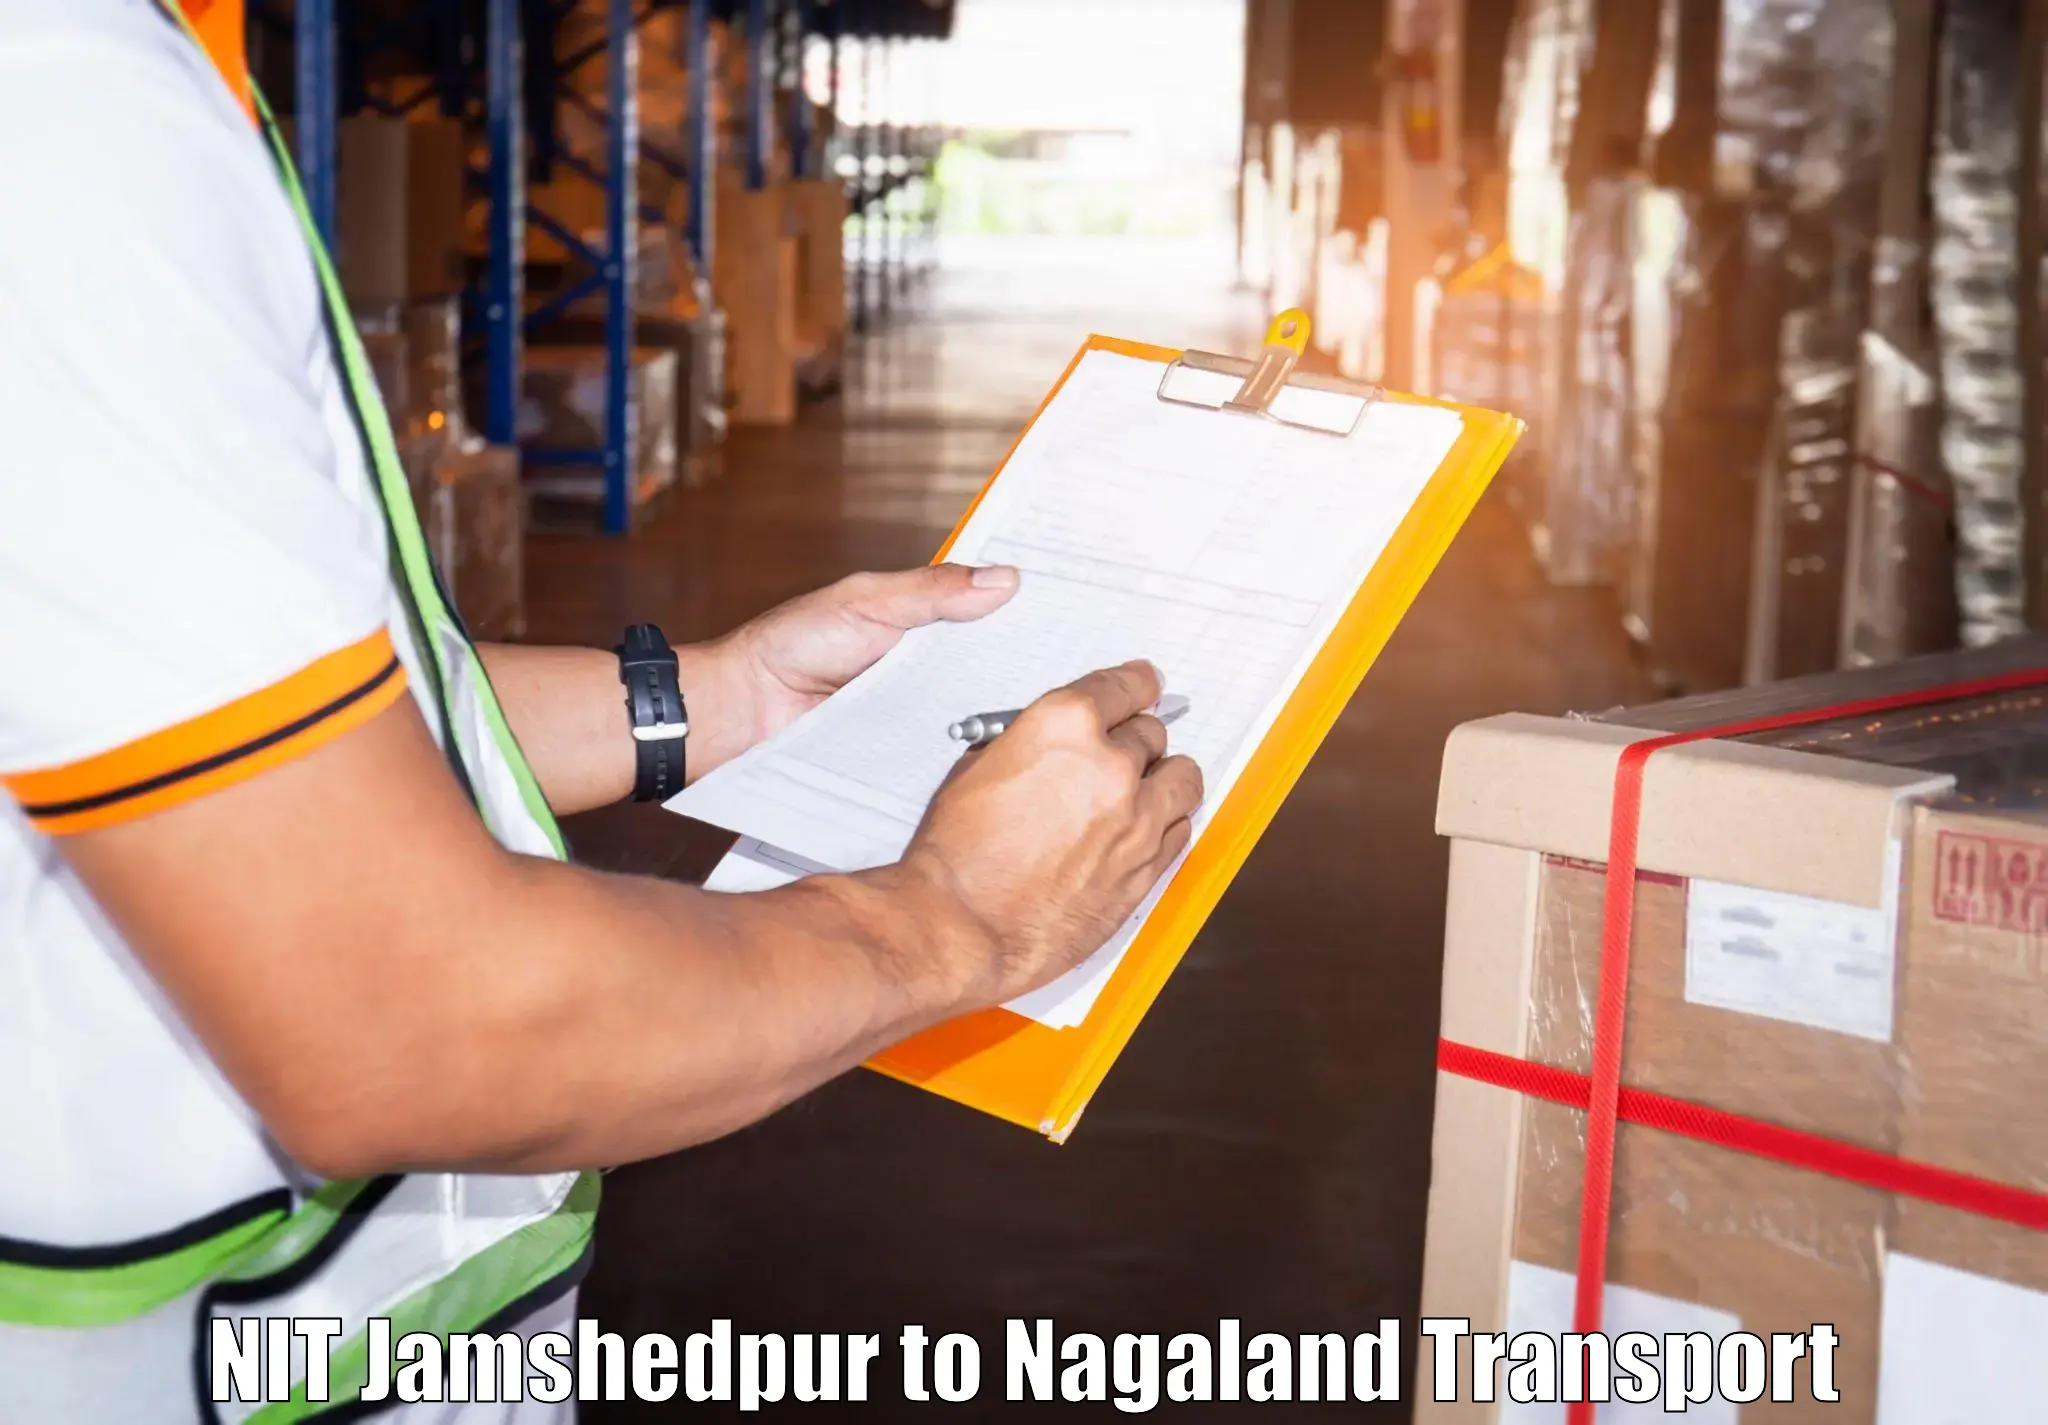 Cargo train transport services in NIT Jamshedpur to Kohima